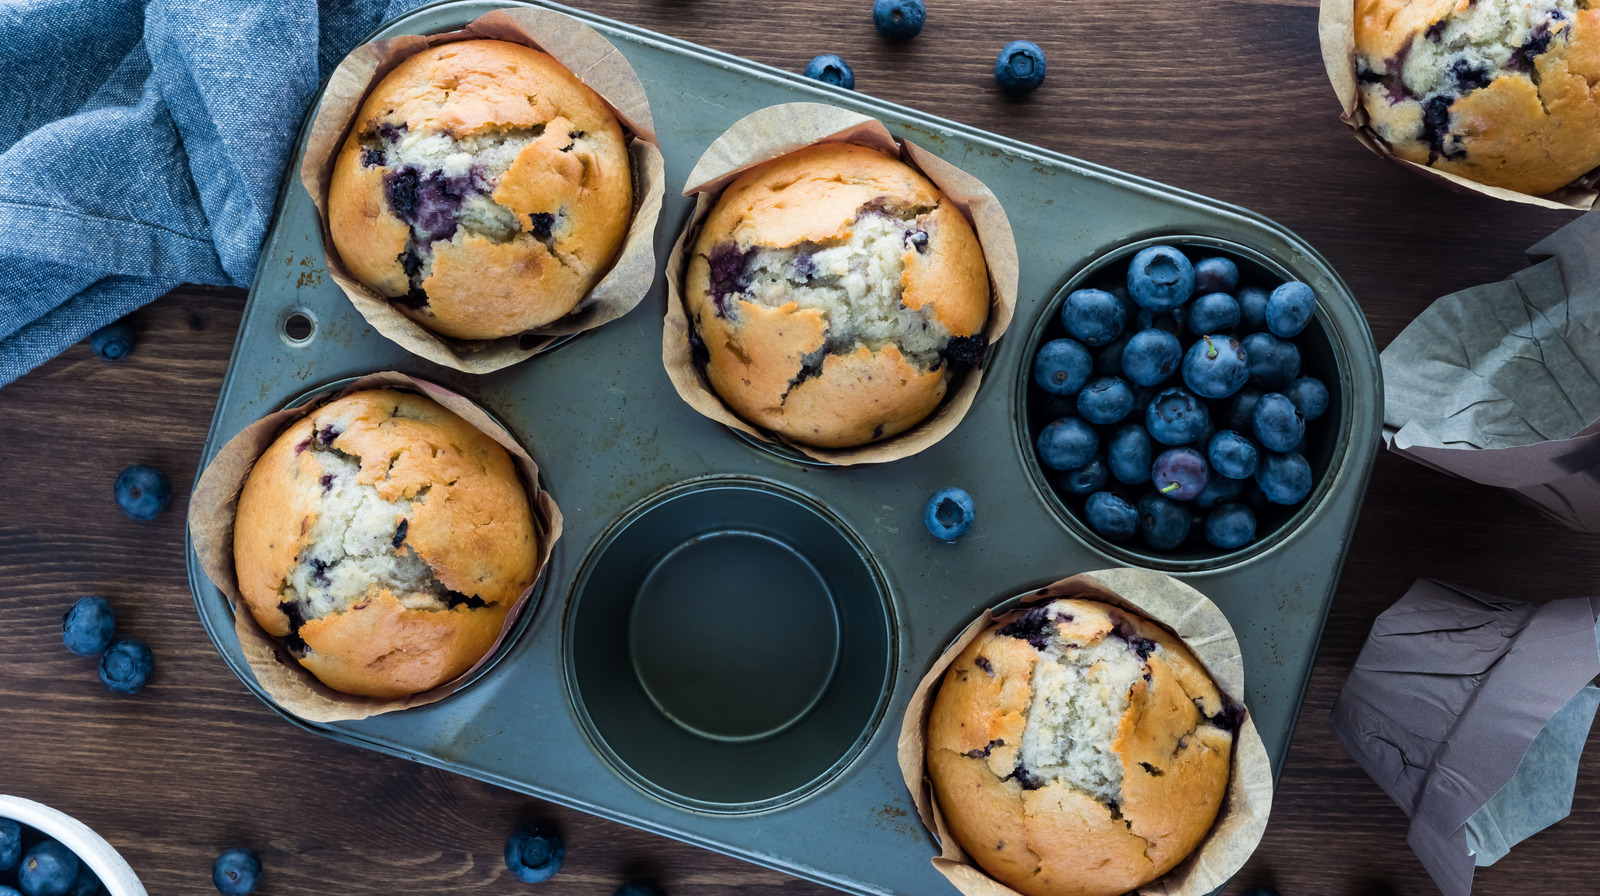 The Absolute Best Uses For Your Muffin Tin